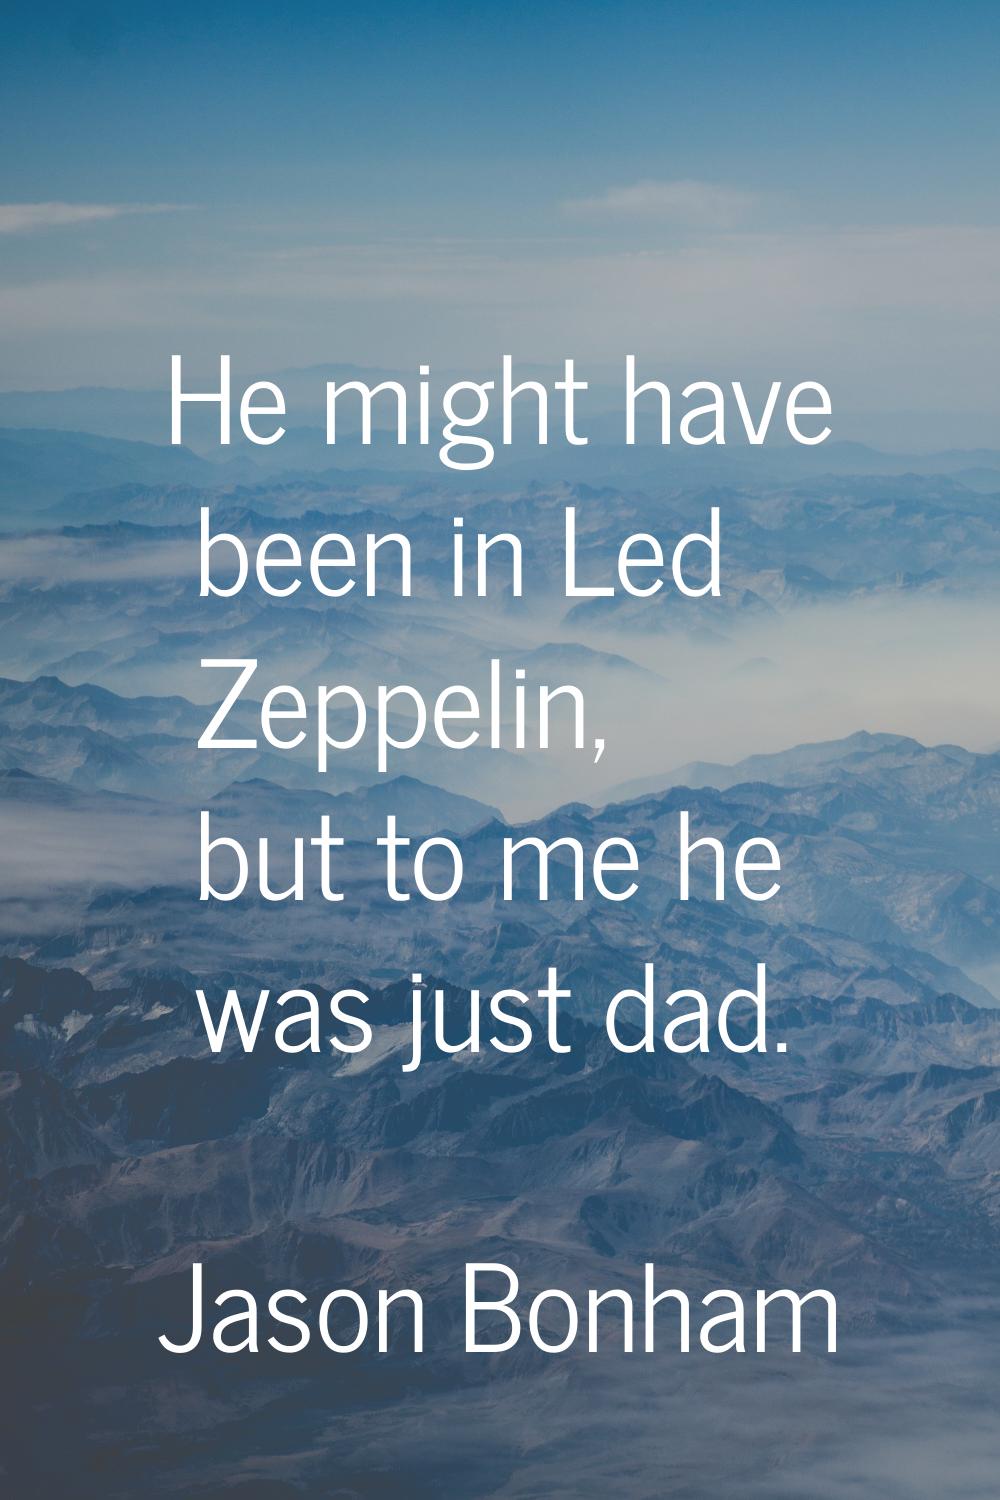 He might have been in Led Zeppelin, but to me he was just dad.